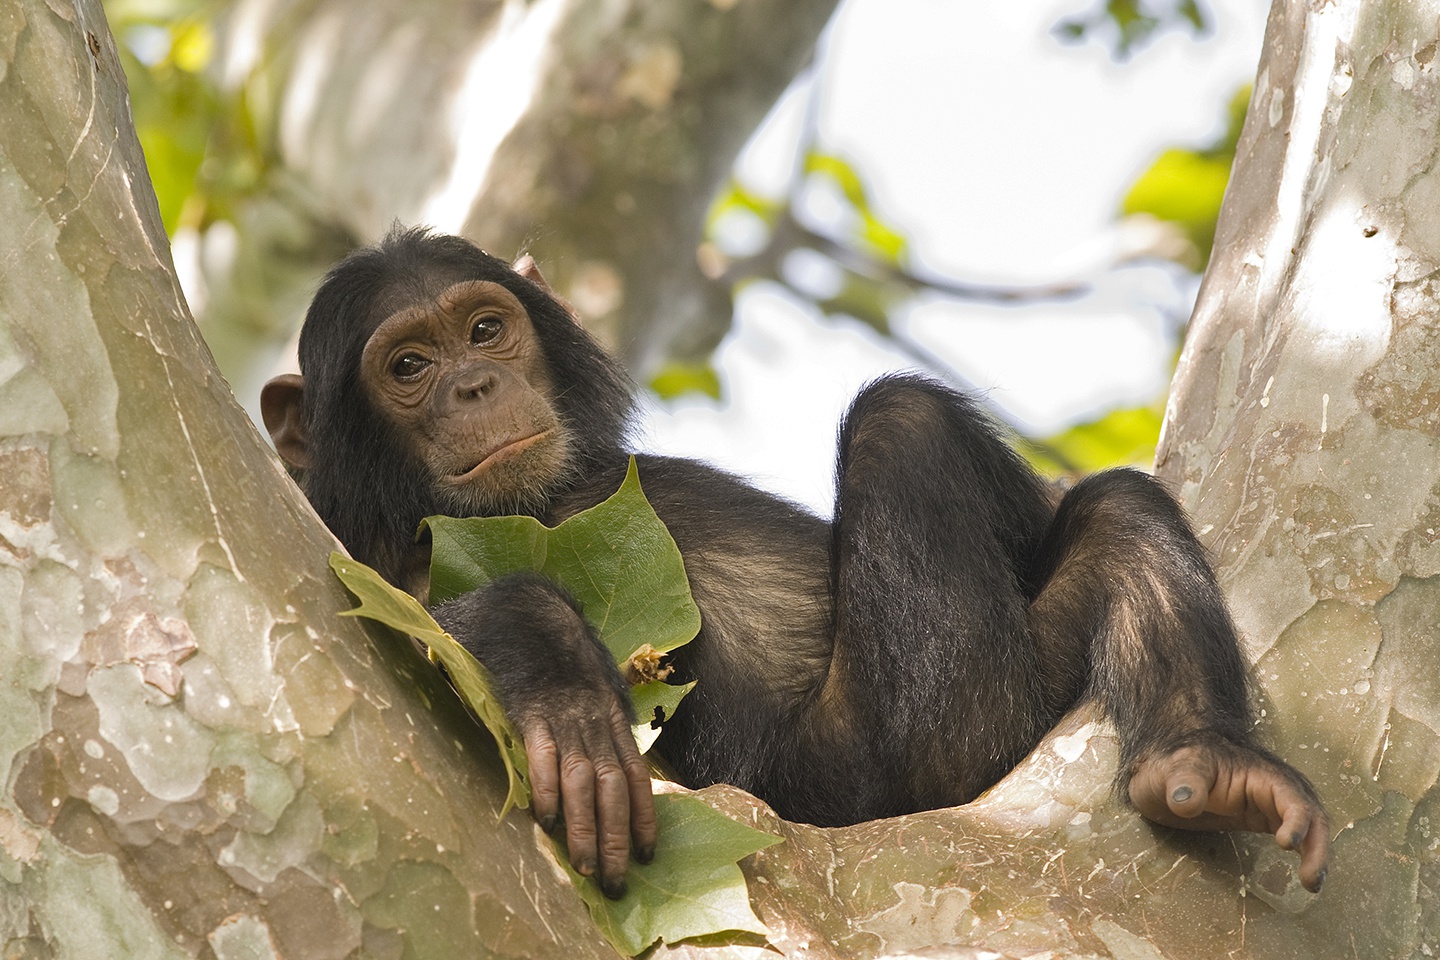 Monkeys vs Apes: How are they different? - PASA